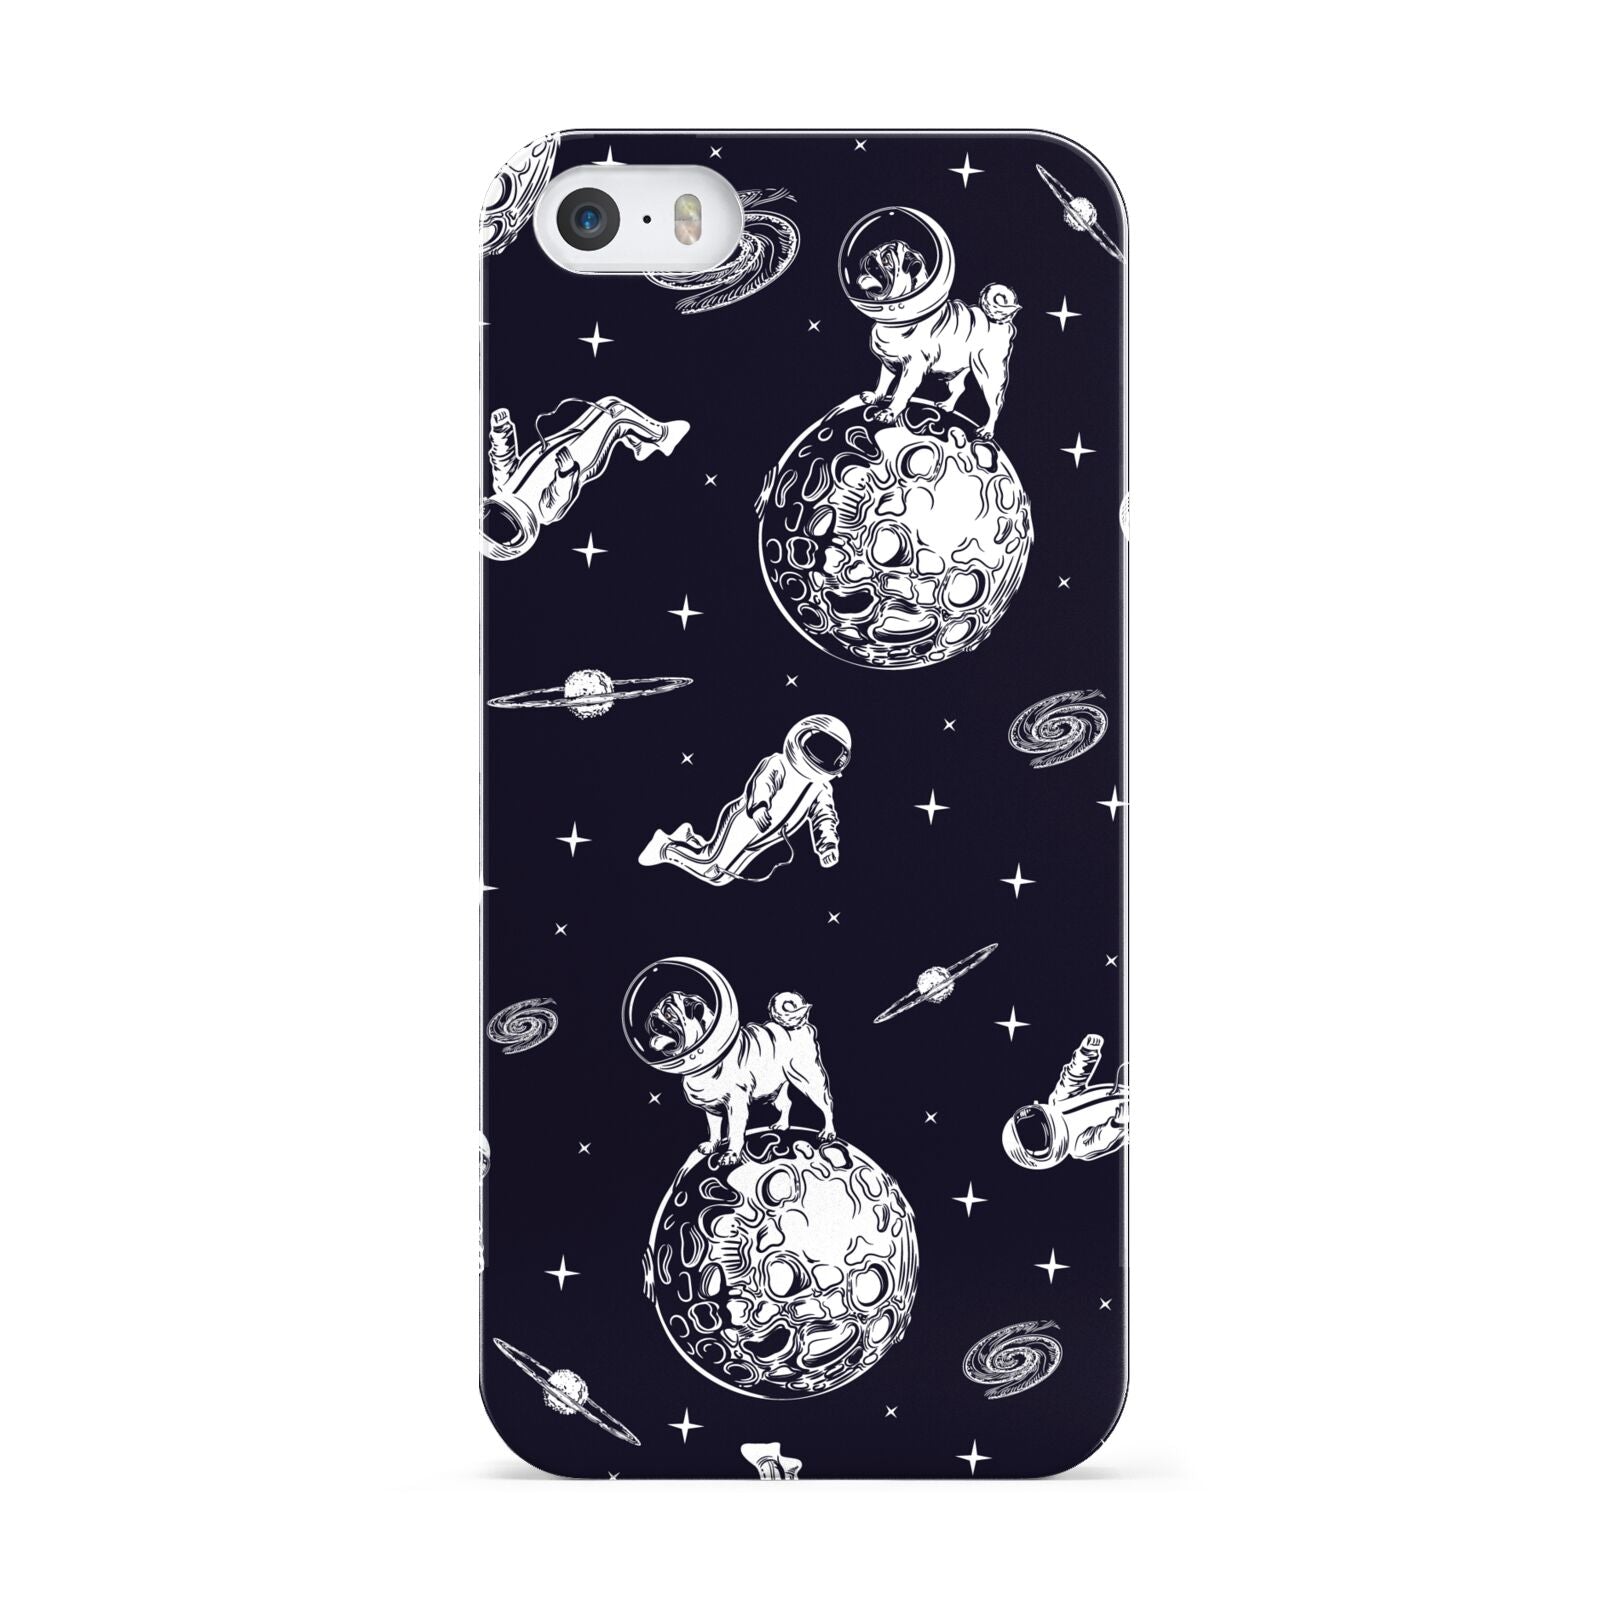 Pug in Space Apple iPhone 5 Case